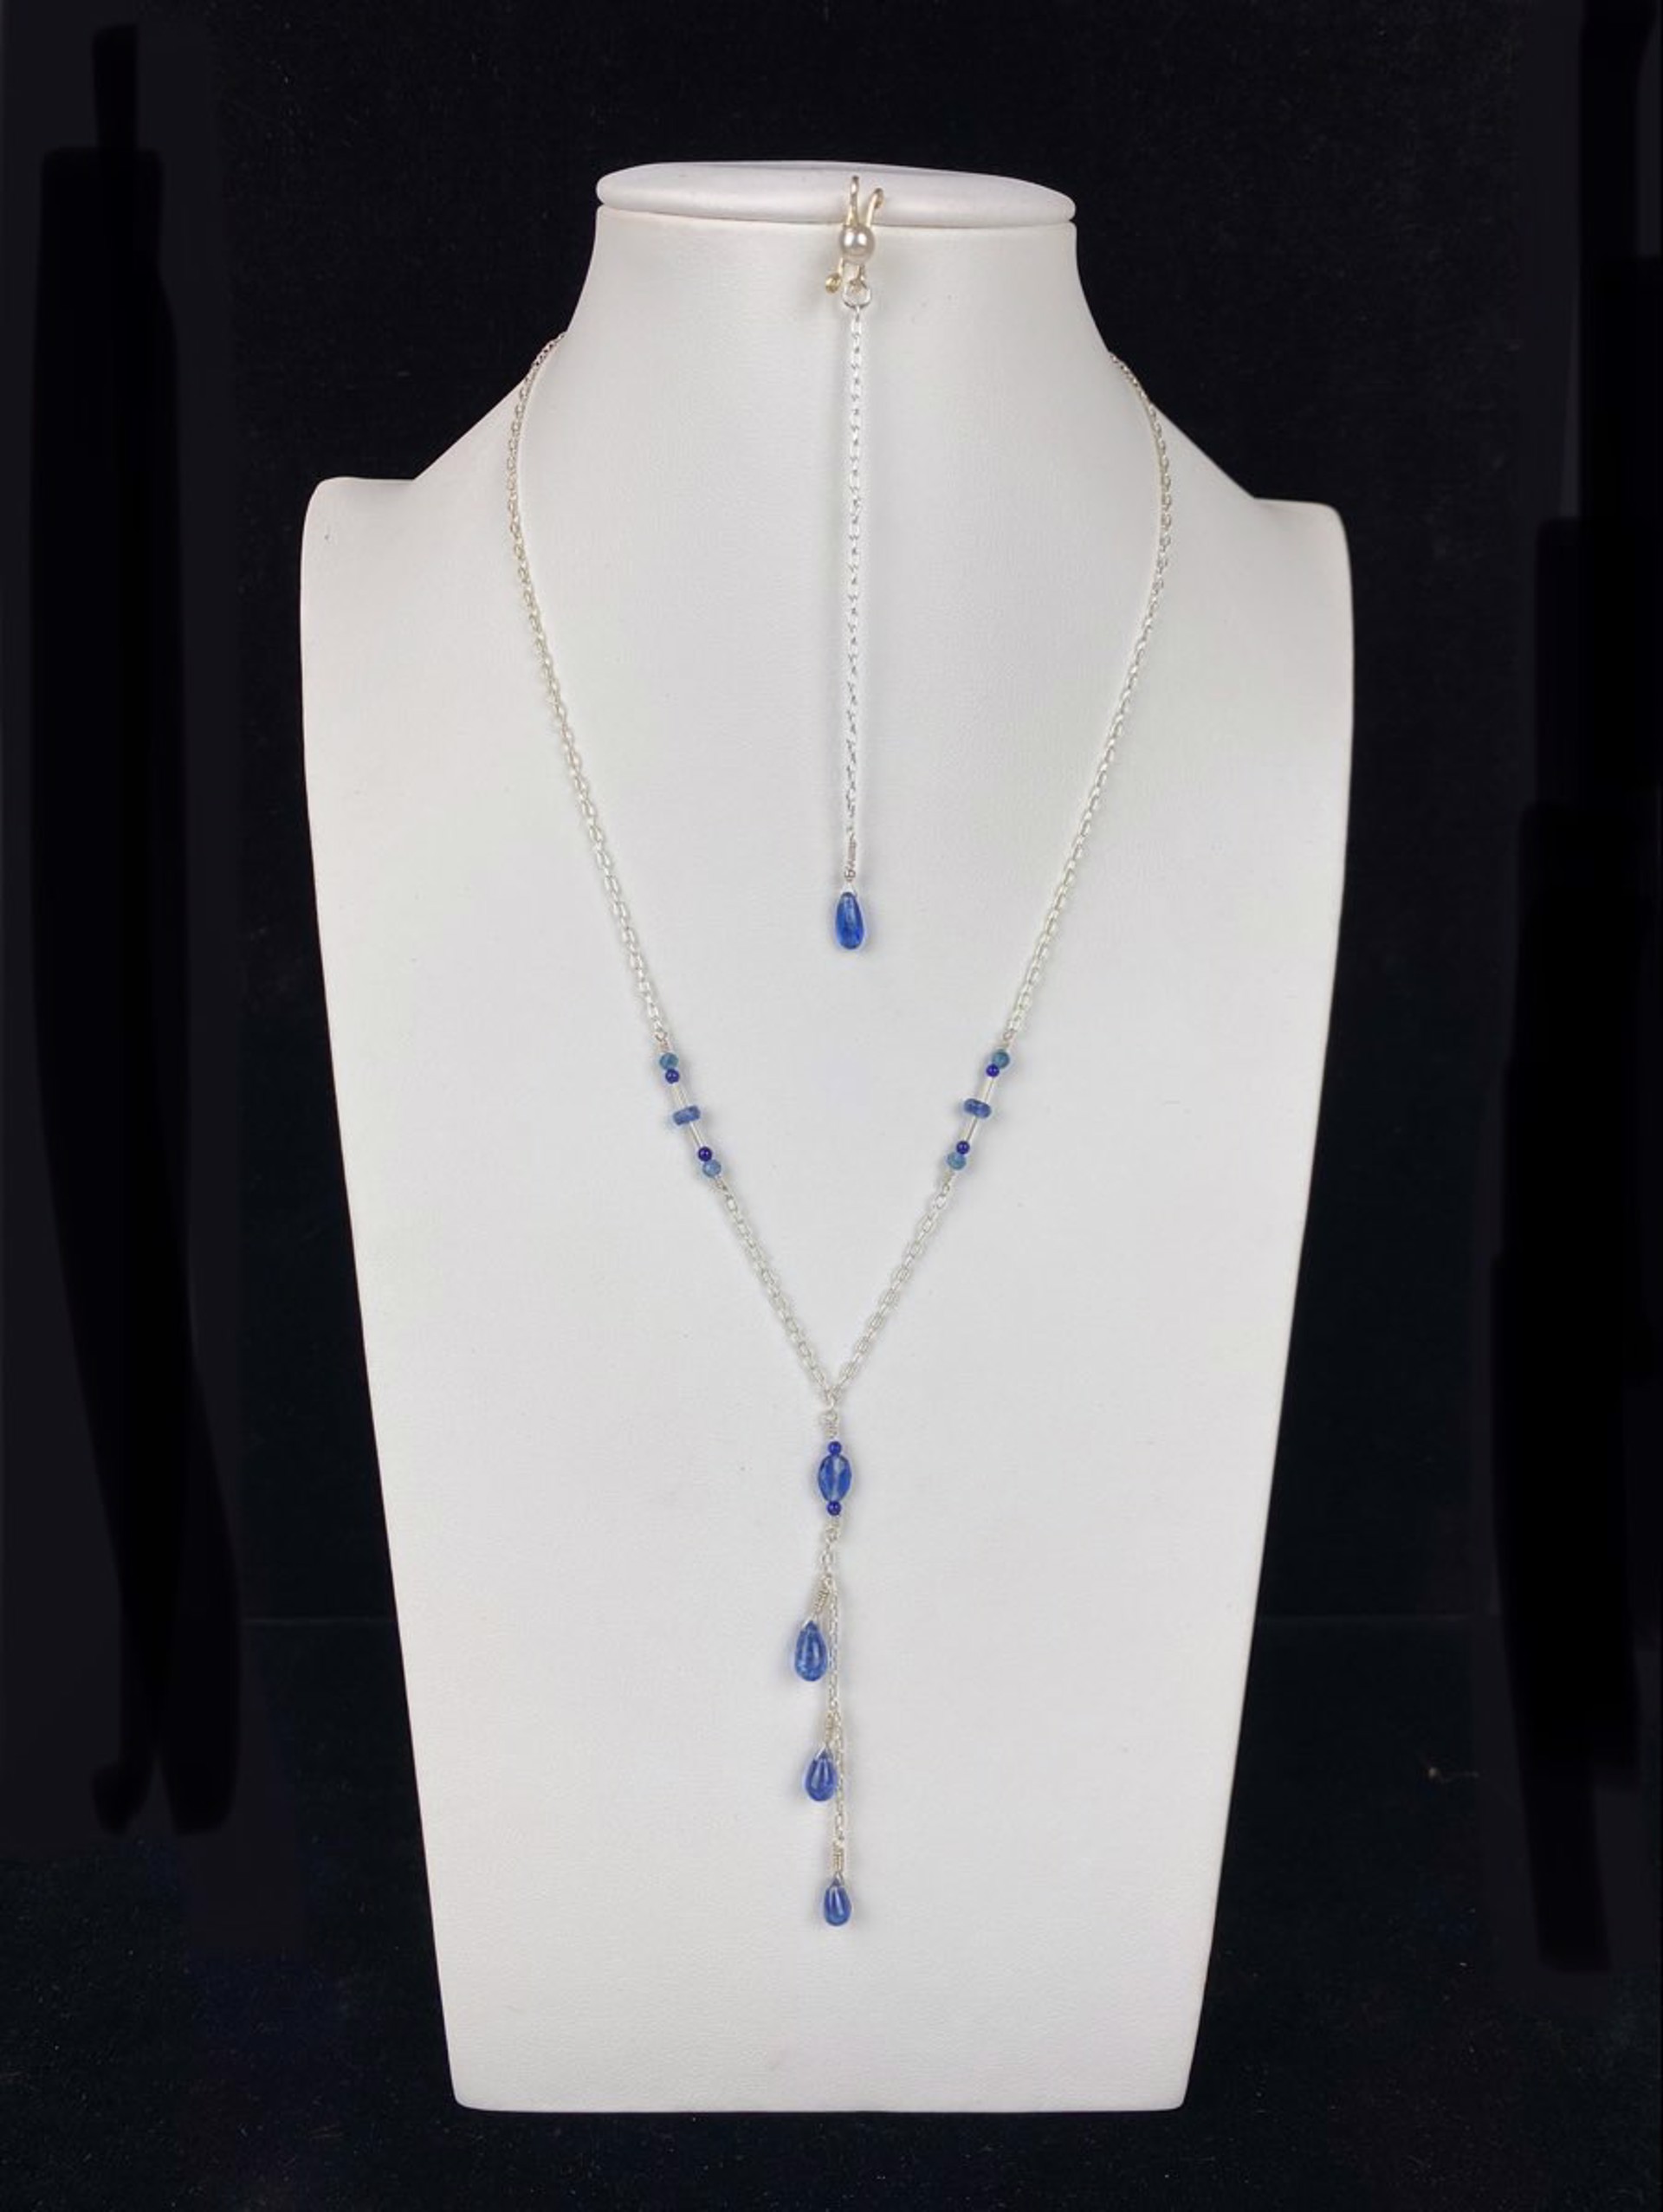 Kyanite, Lapis, and Sterling Silver Waterfall Necklace and Infinity Pendant by Lisa Kelley